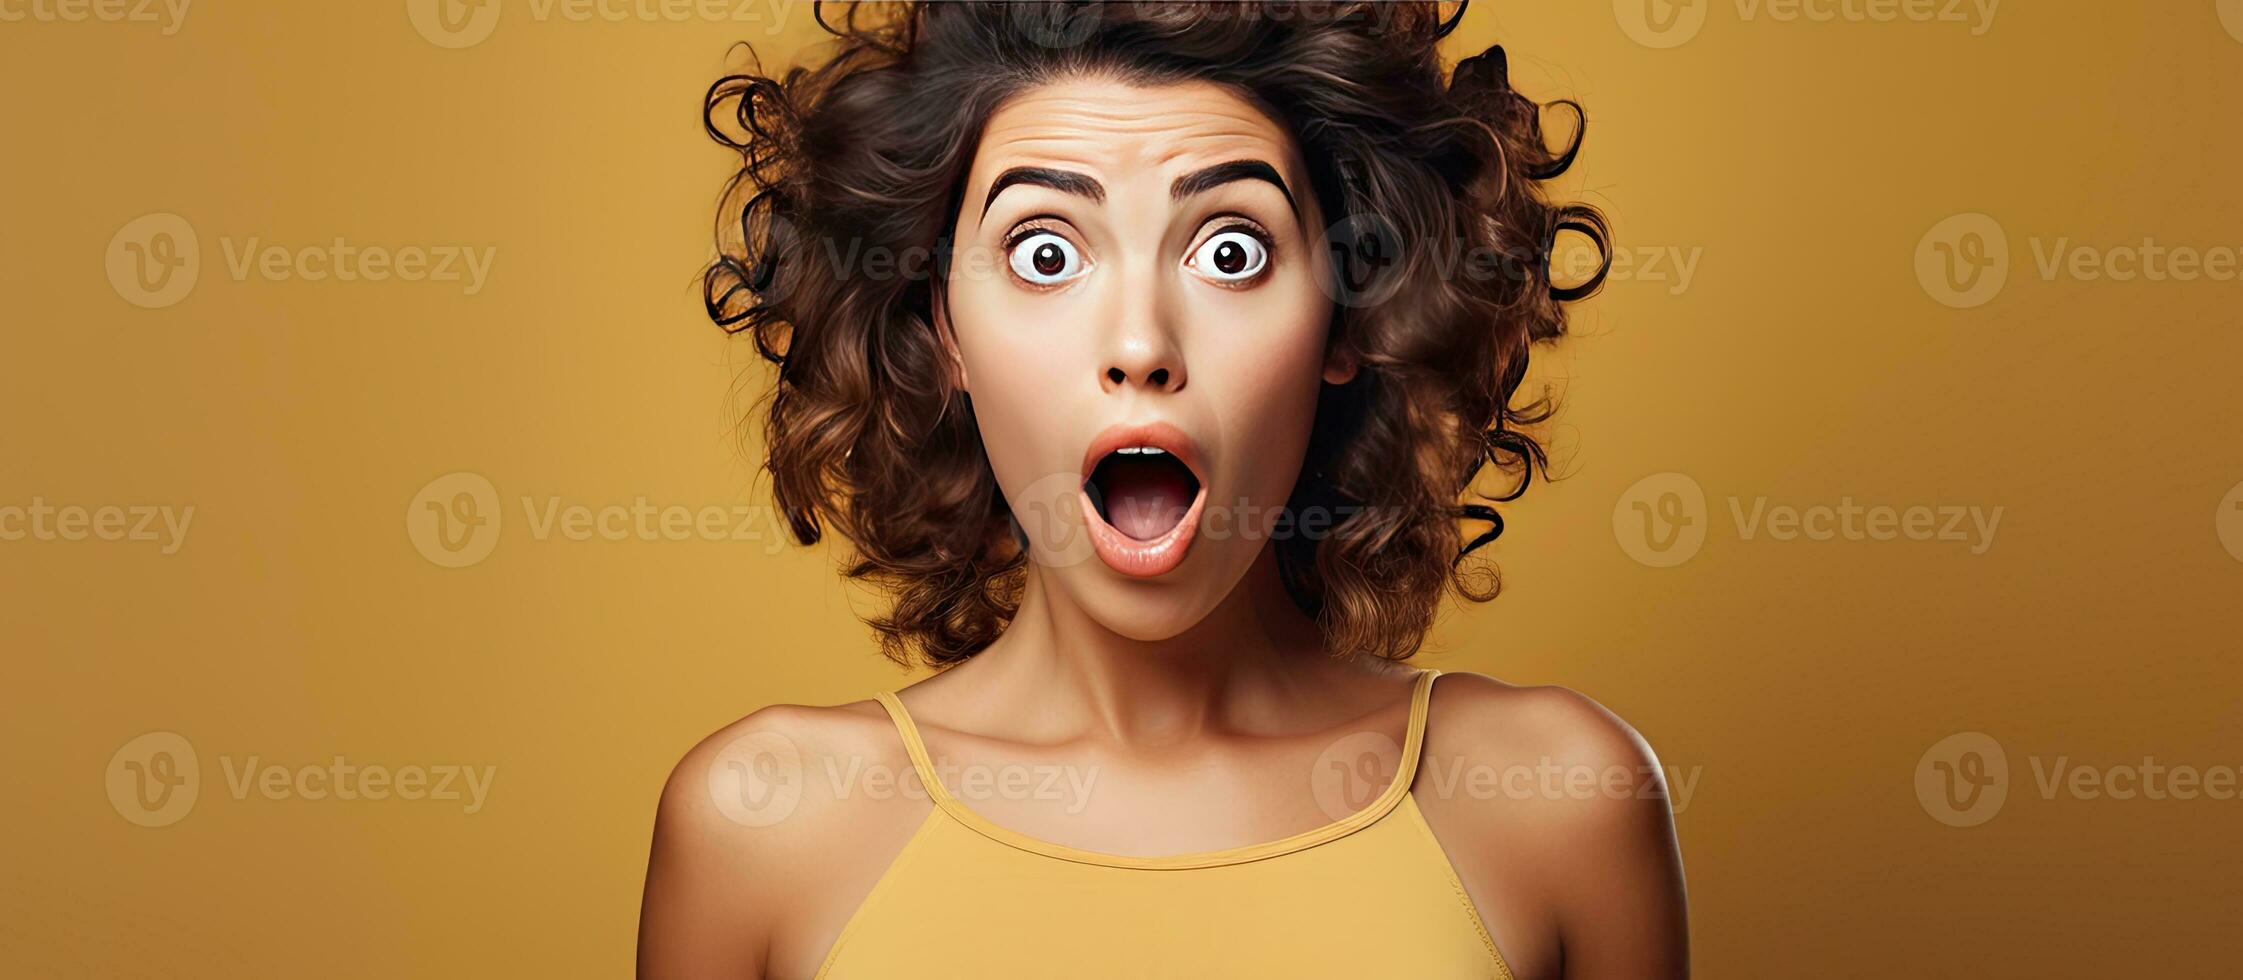 Shocked and surprised young woman pointing with amazed expression photo